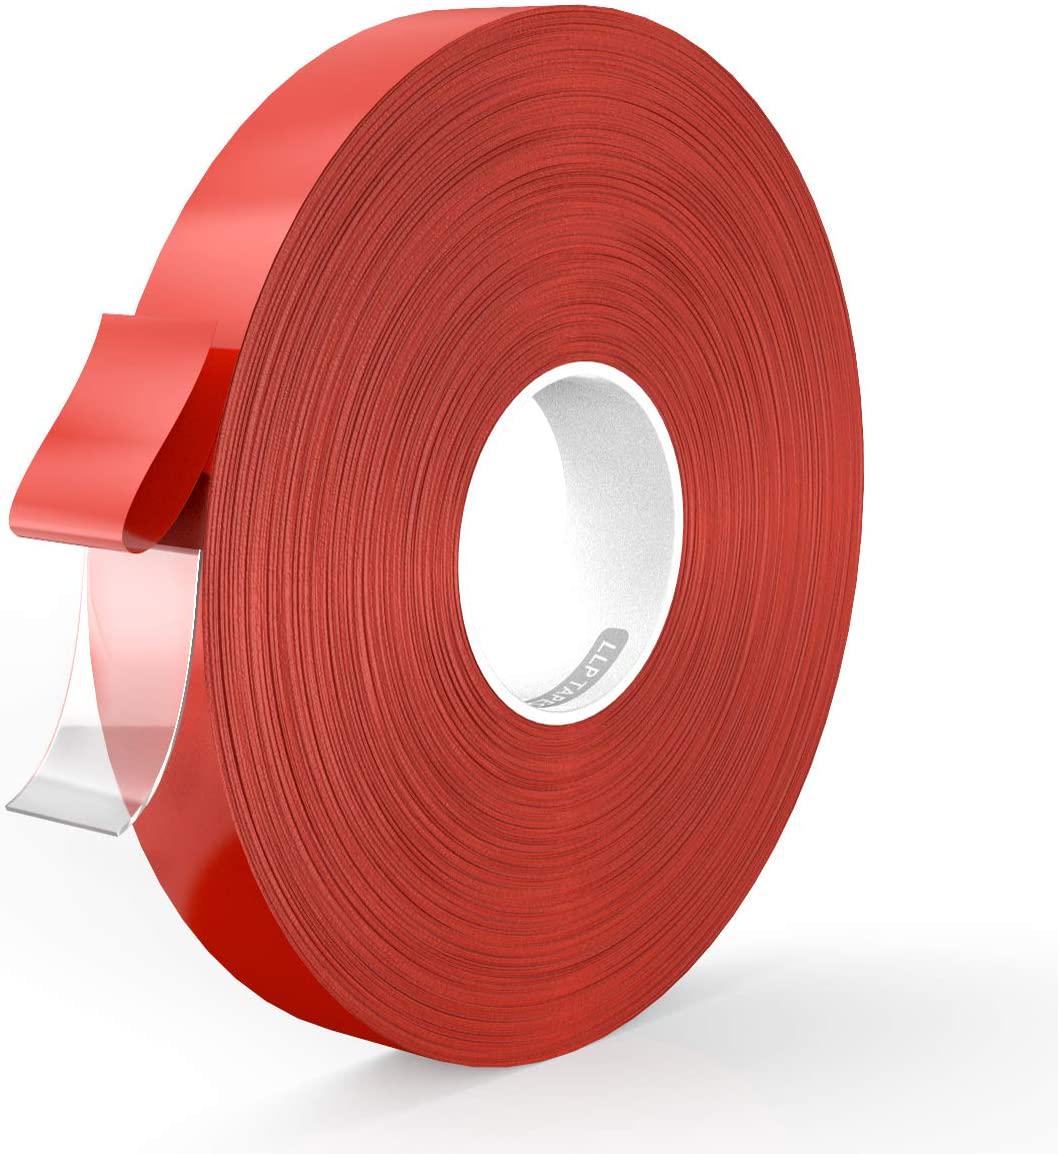 LLPT, LLPT Double Sided Tape Acrylic Waterproof Residue Free Strong Mounting Tape 0.6 Inch x 108 Feet Clear(AC0600)